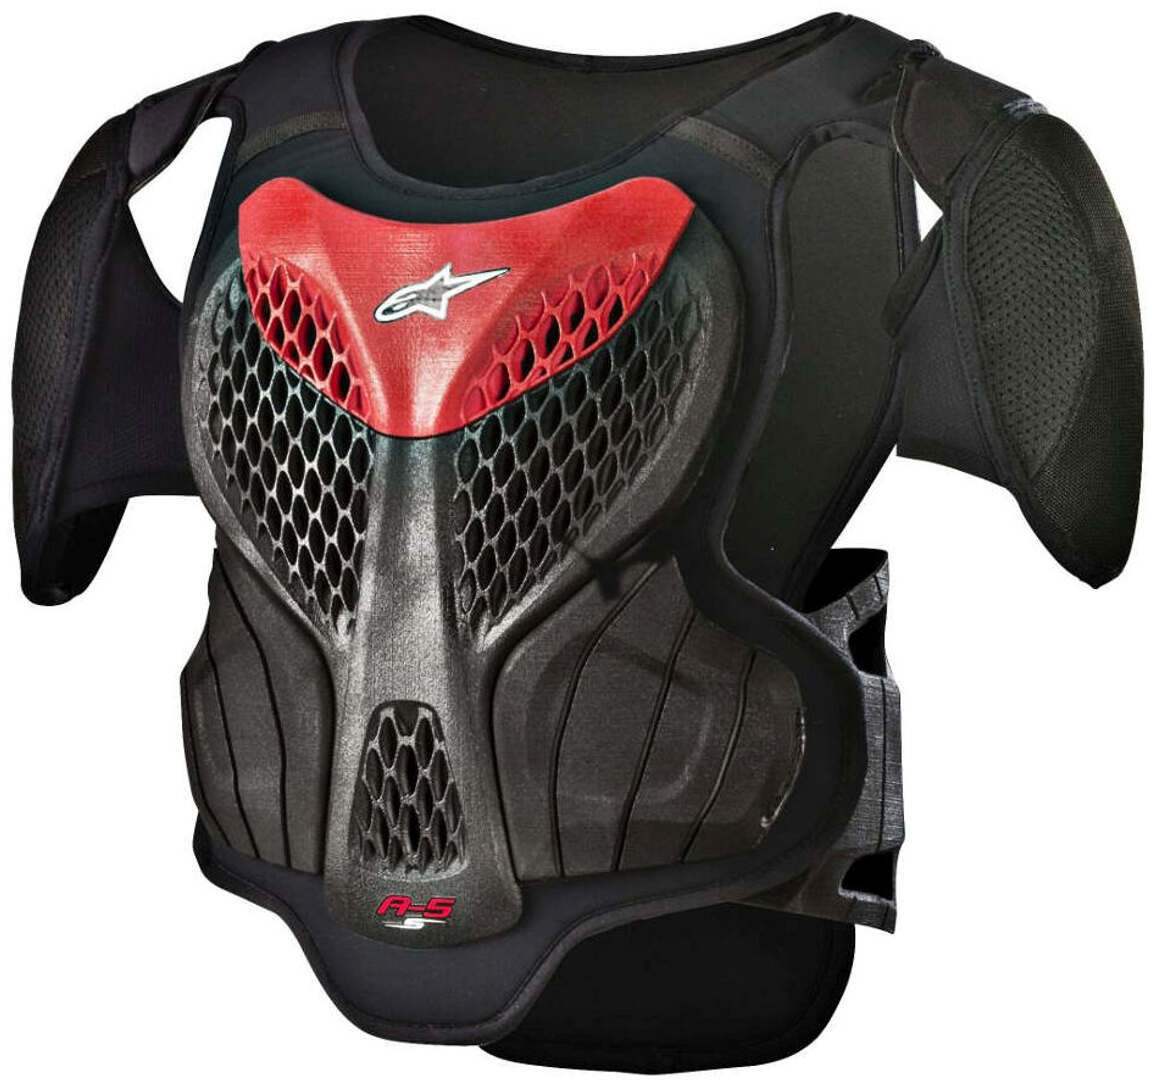 Photos - Motorcycle Clothing Alpinestars Kids Protector Vest A-5 S18 - Black/ Red 